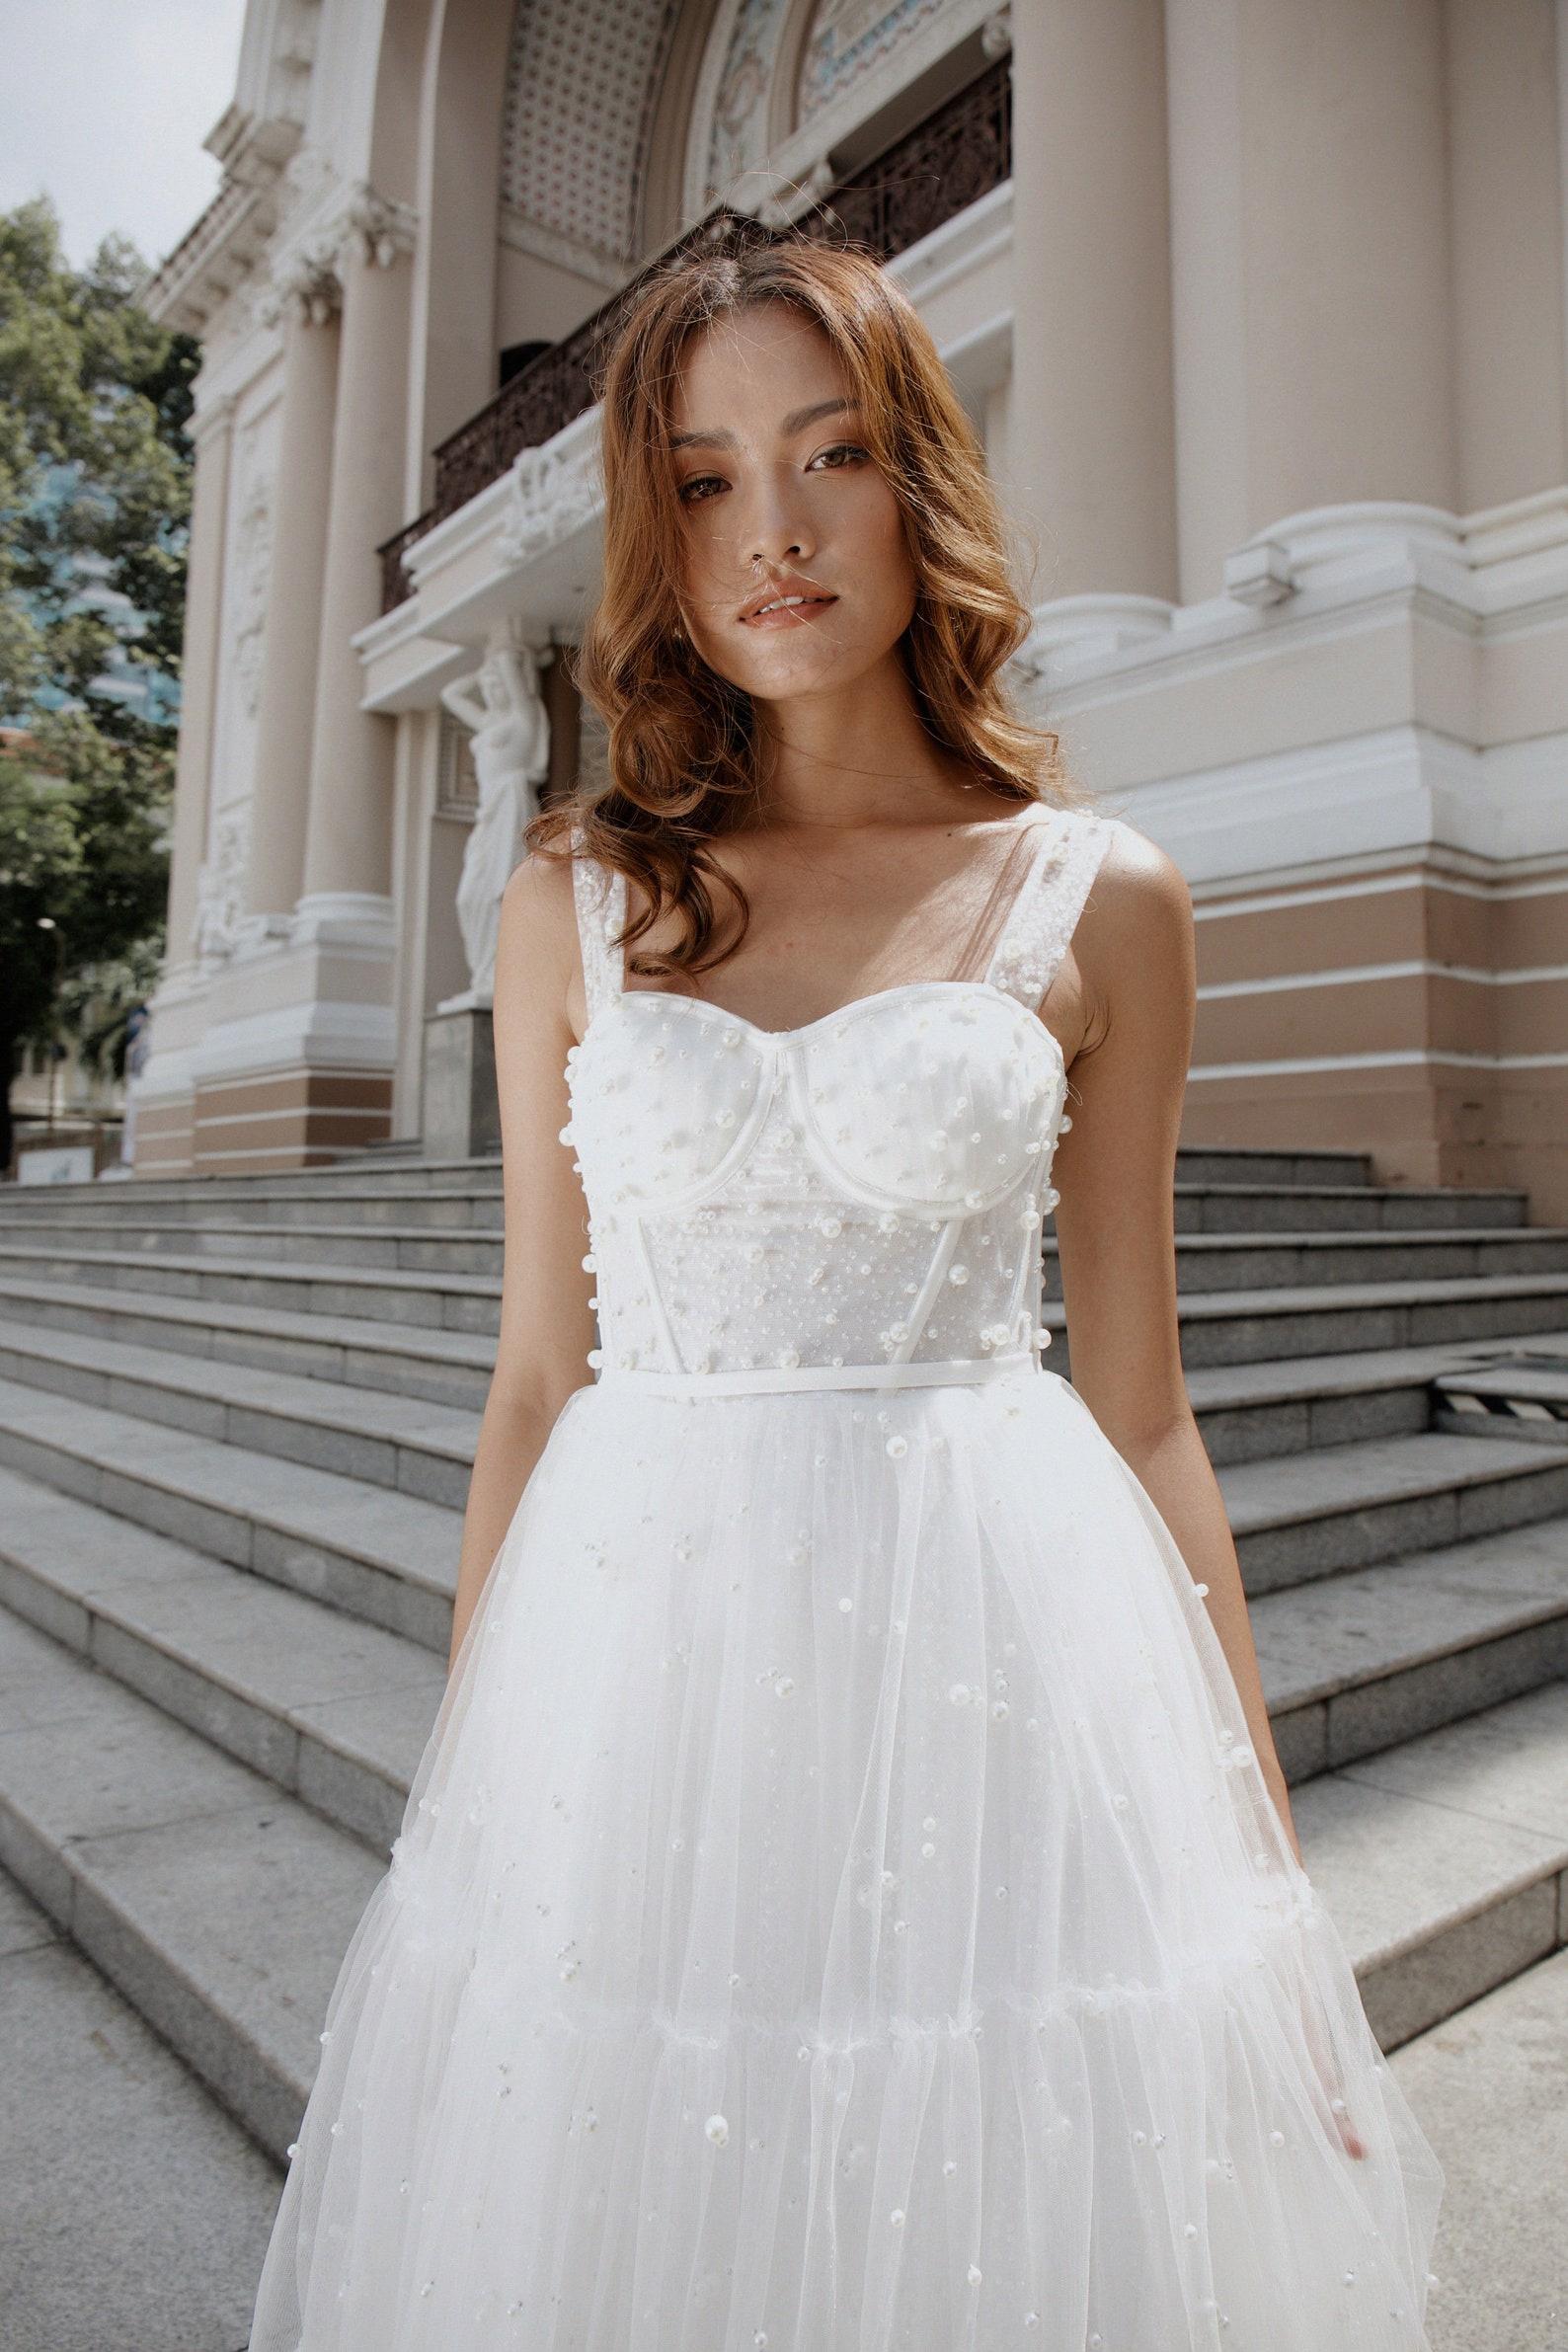 Pearl Wedding Dresses: 23 Pretty Pearl Dresses & Accessories - hitched ...